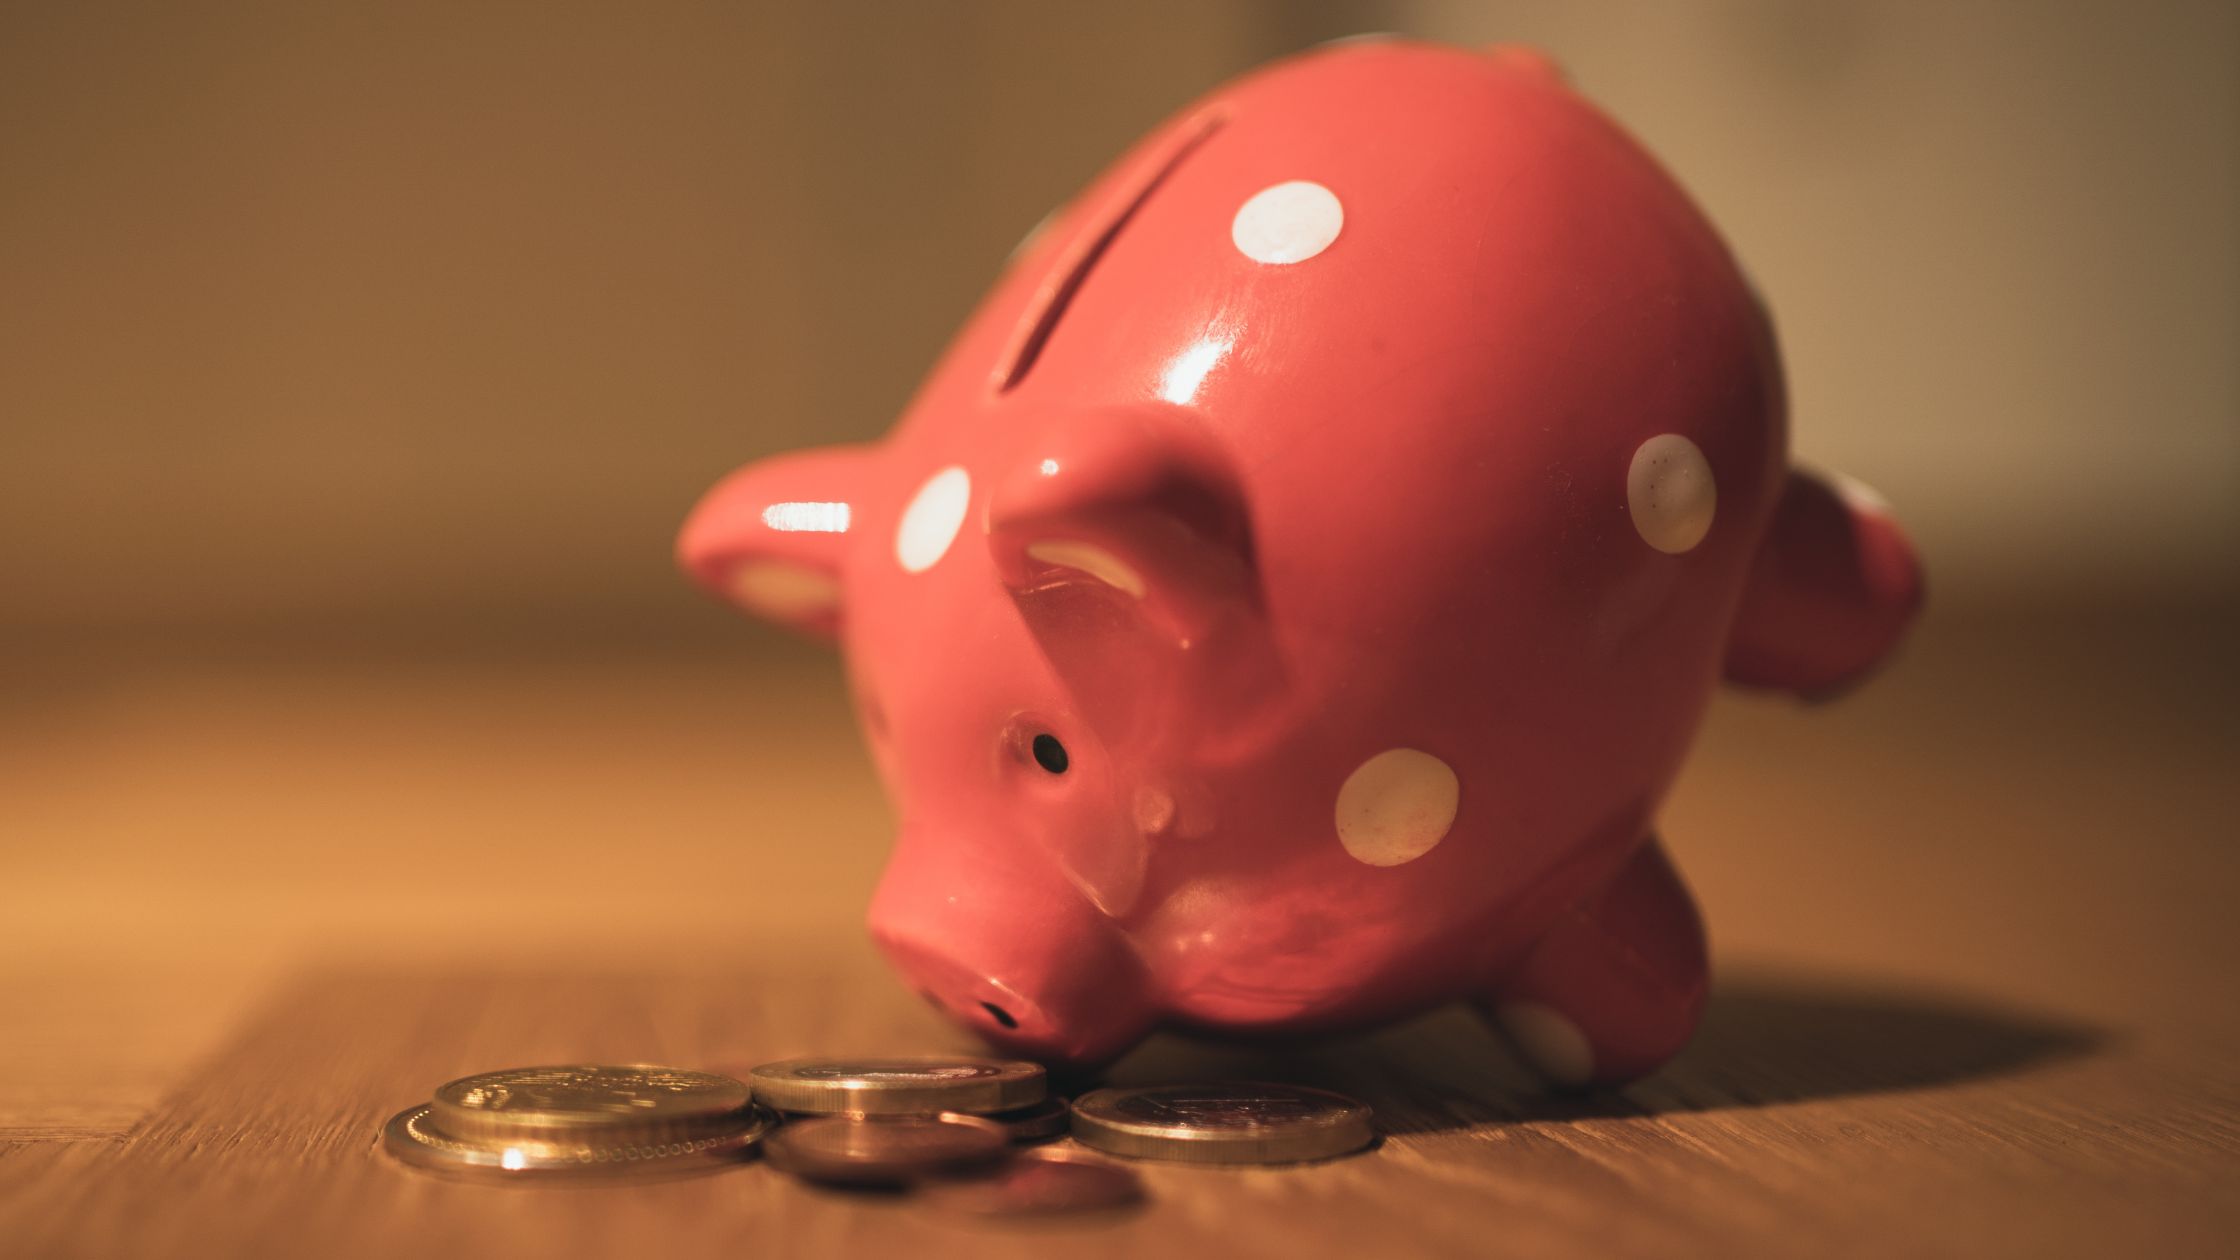 piggy bank - How To Save $10000 in a Year